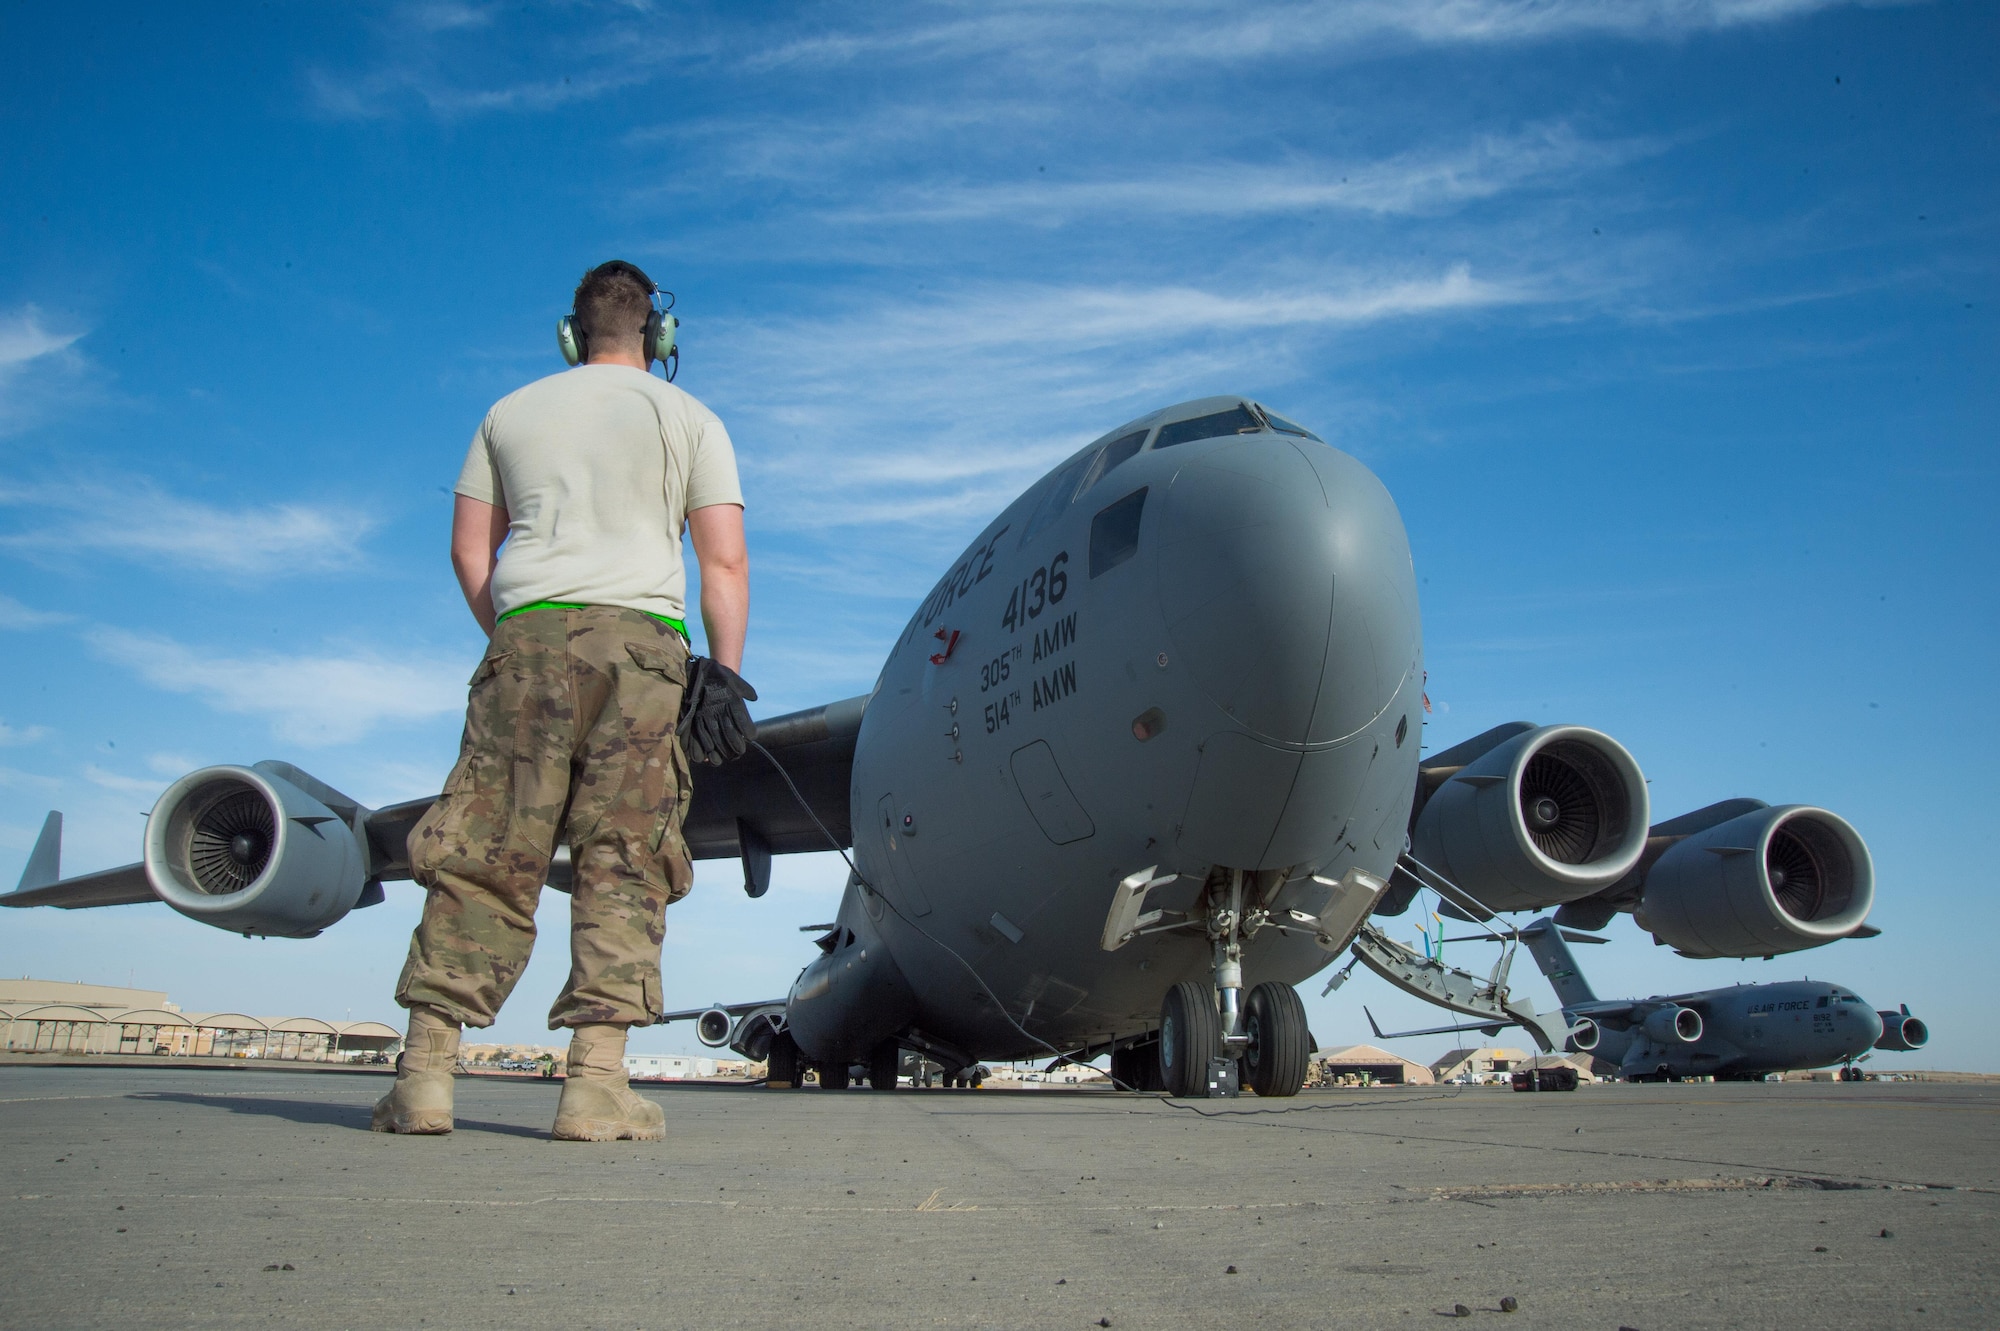 The 5th EAMS is responsible for the aerial port of debarkation and maintains staged C-17 aircraft, as well as providing en route maintenance and support for transient C-17 and C-5 aircraft flying in and out of Iraq, Afghanistan and Southwest Asia.